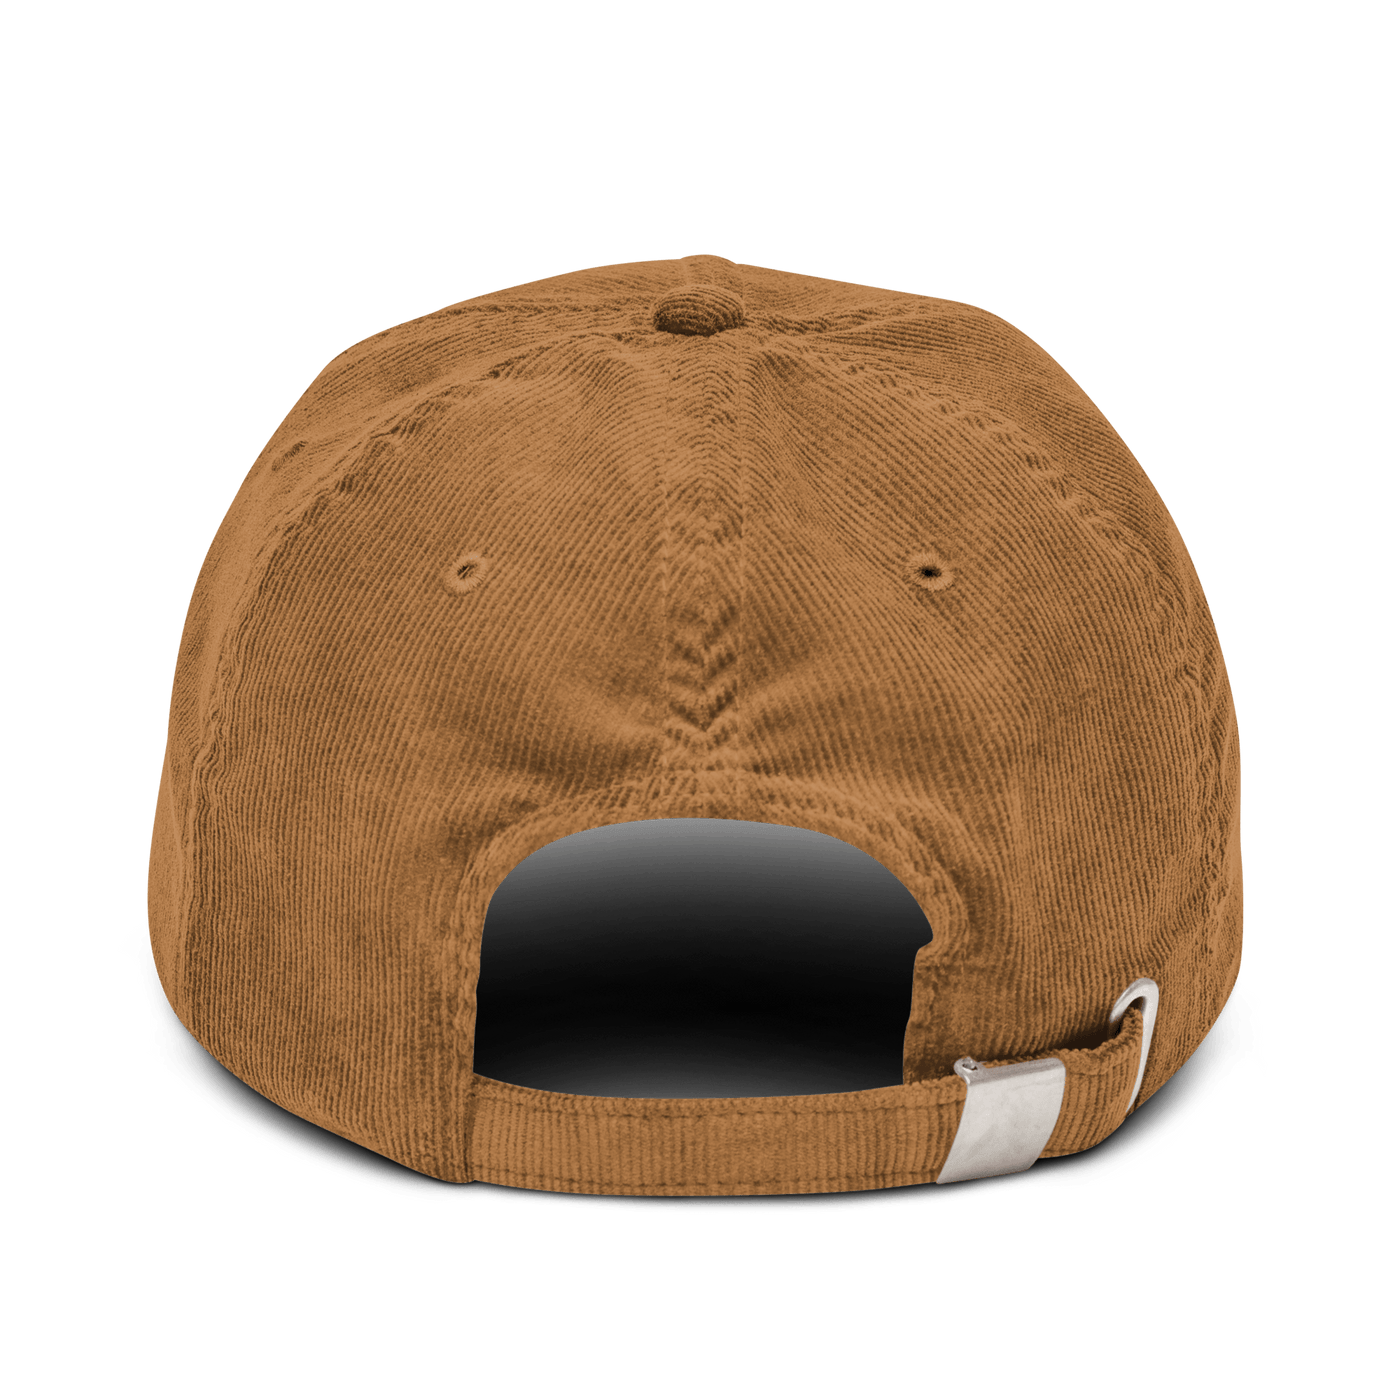 Fries Before Guys Corduroy hat - Camel - - Just Another Cap Store